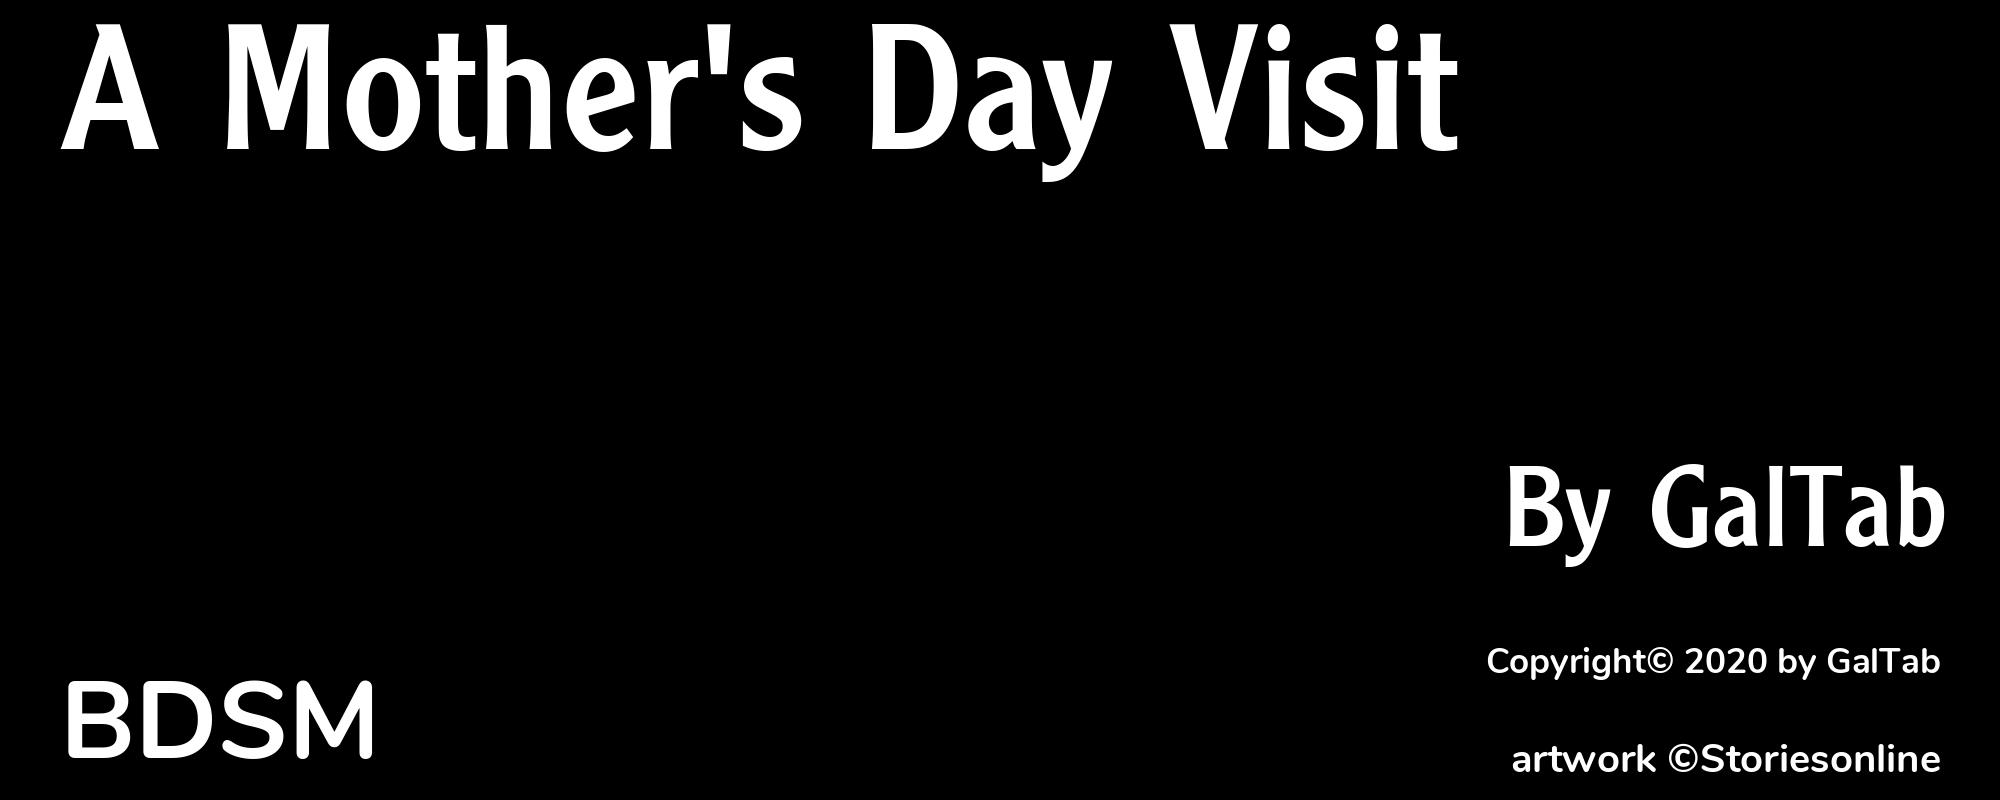 A Mother's Day Visit - Cover